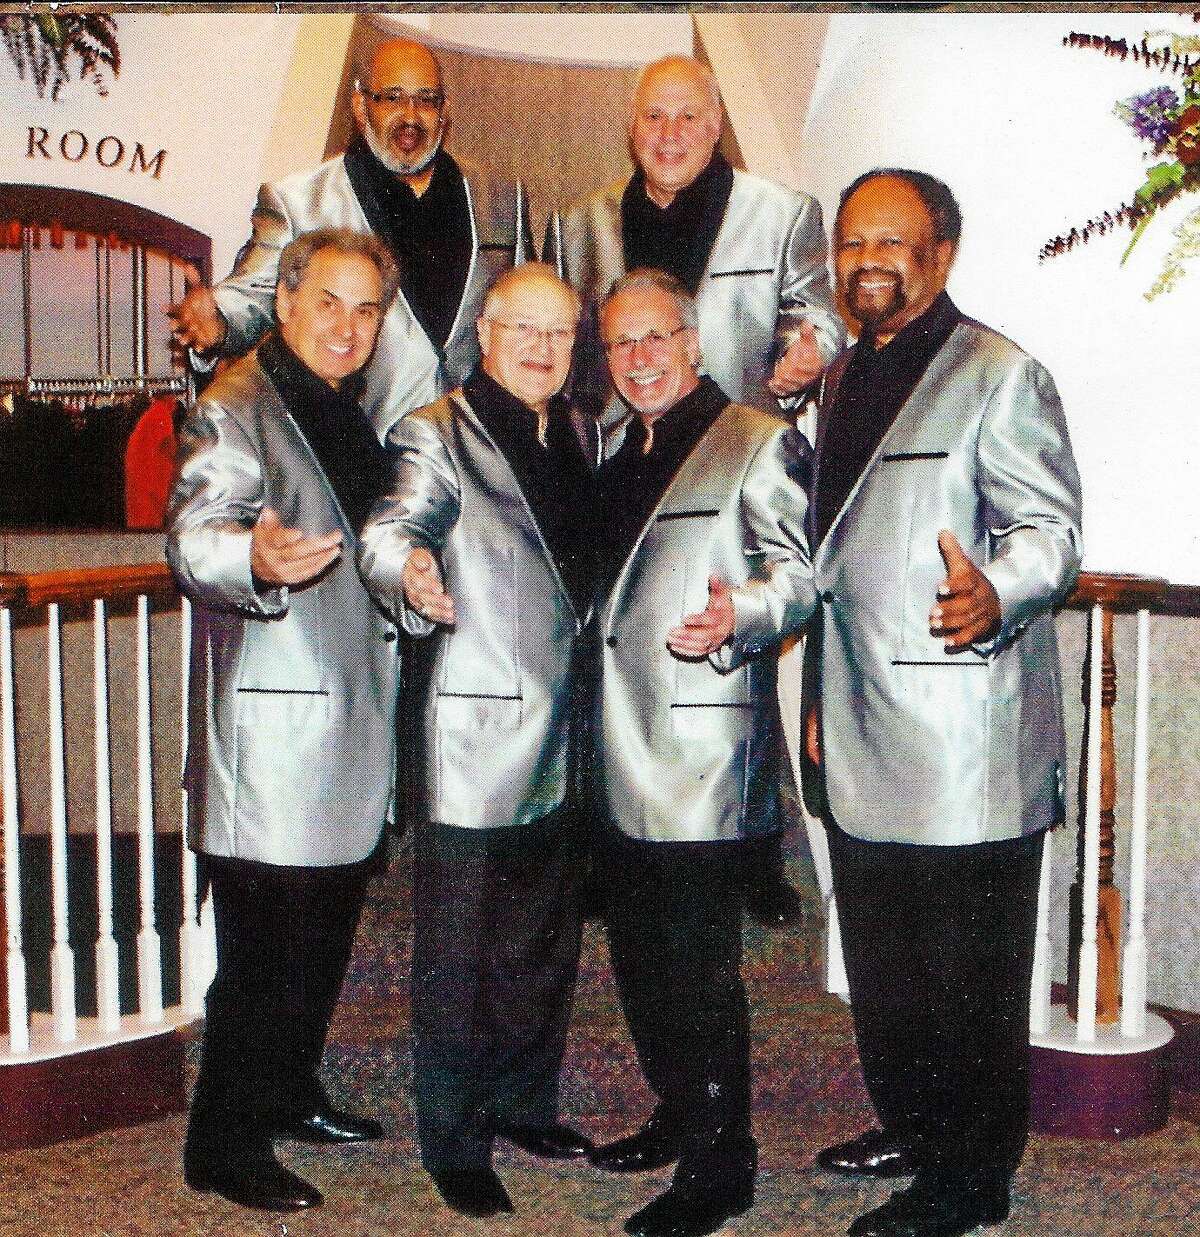 Contributed photo Bridge Street Live will participate in the 20th annual Sam Collins Day celebration taking place in Collinsville Saturday, Sept. 20, and feature one of Connecticut’s premier Beatles tribute bands, Mystery Tour, along with New Britain’s a cappella doo wop group, The Crown Imperials.